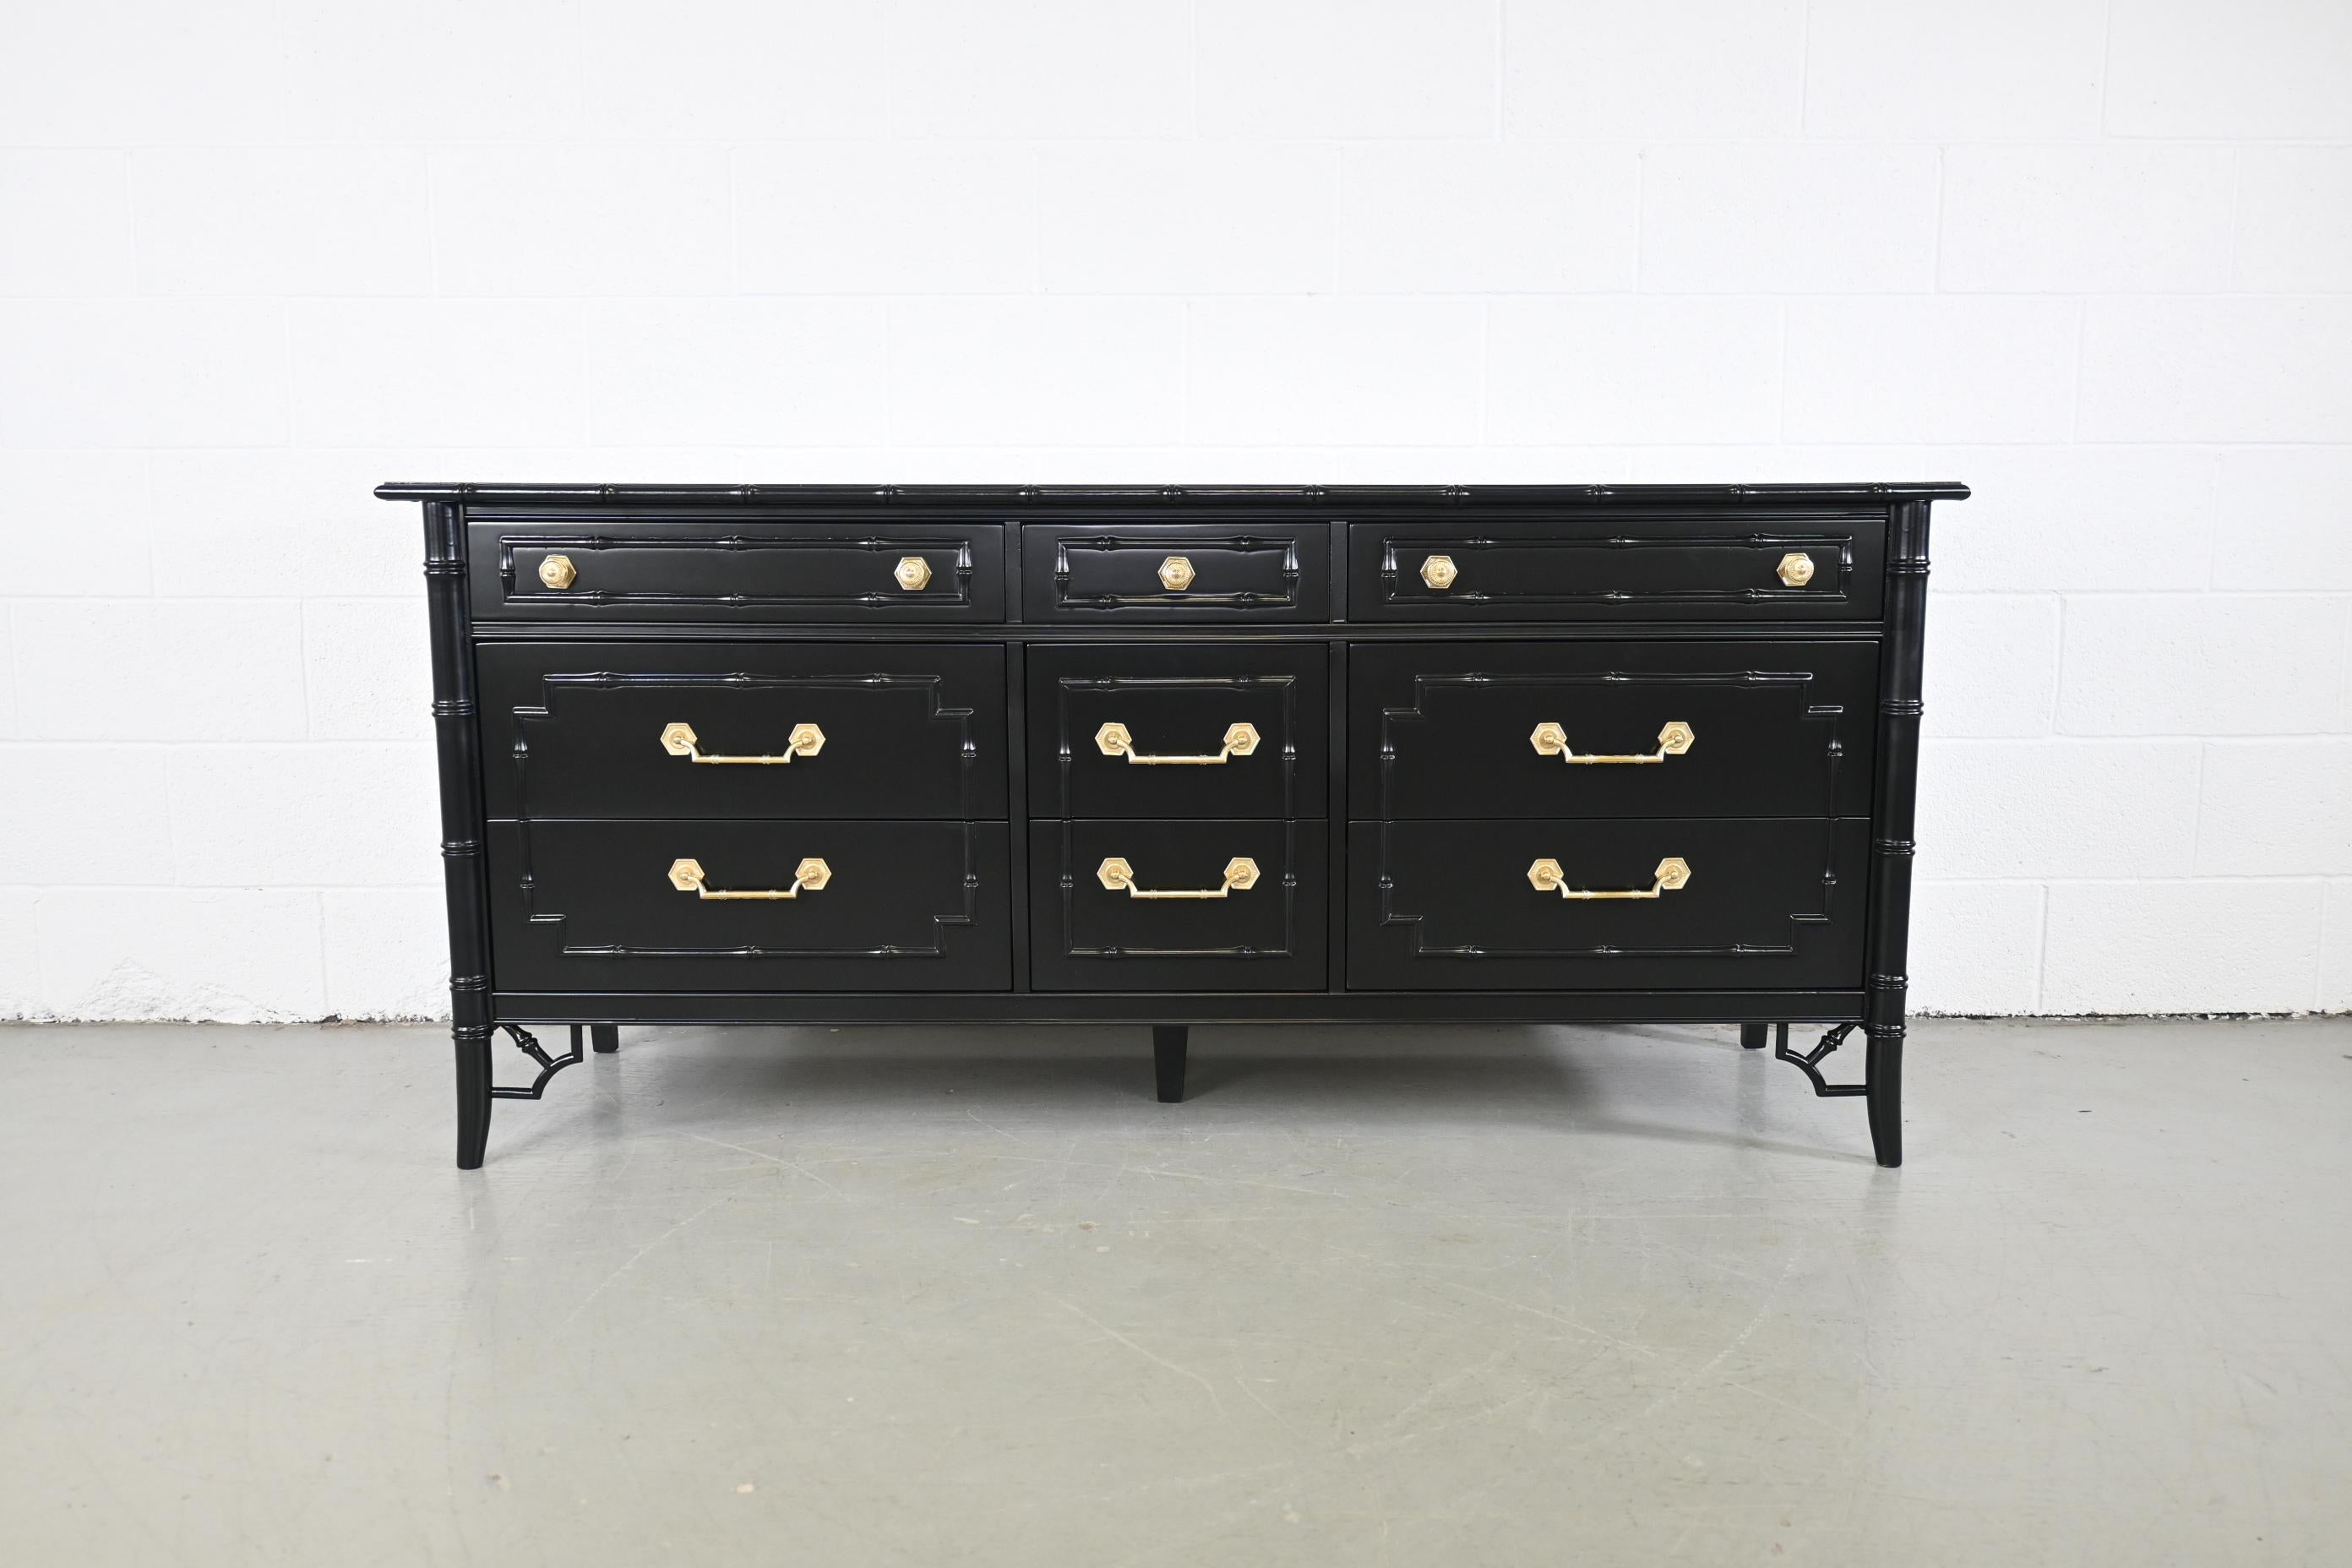 Thomasville Furniture Allegro Faux Bamboo Black Lacquered Mid Century dresser

Thomasville Furniture, USA, 1970s

65.75 Wide x 19.25 Deep x 29.5 High

Hollywood Regency style Mid-Century Modern black lacquered nine drawer dresser with brass